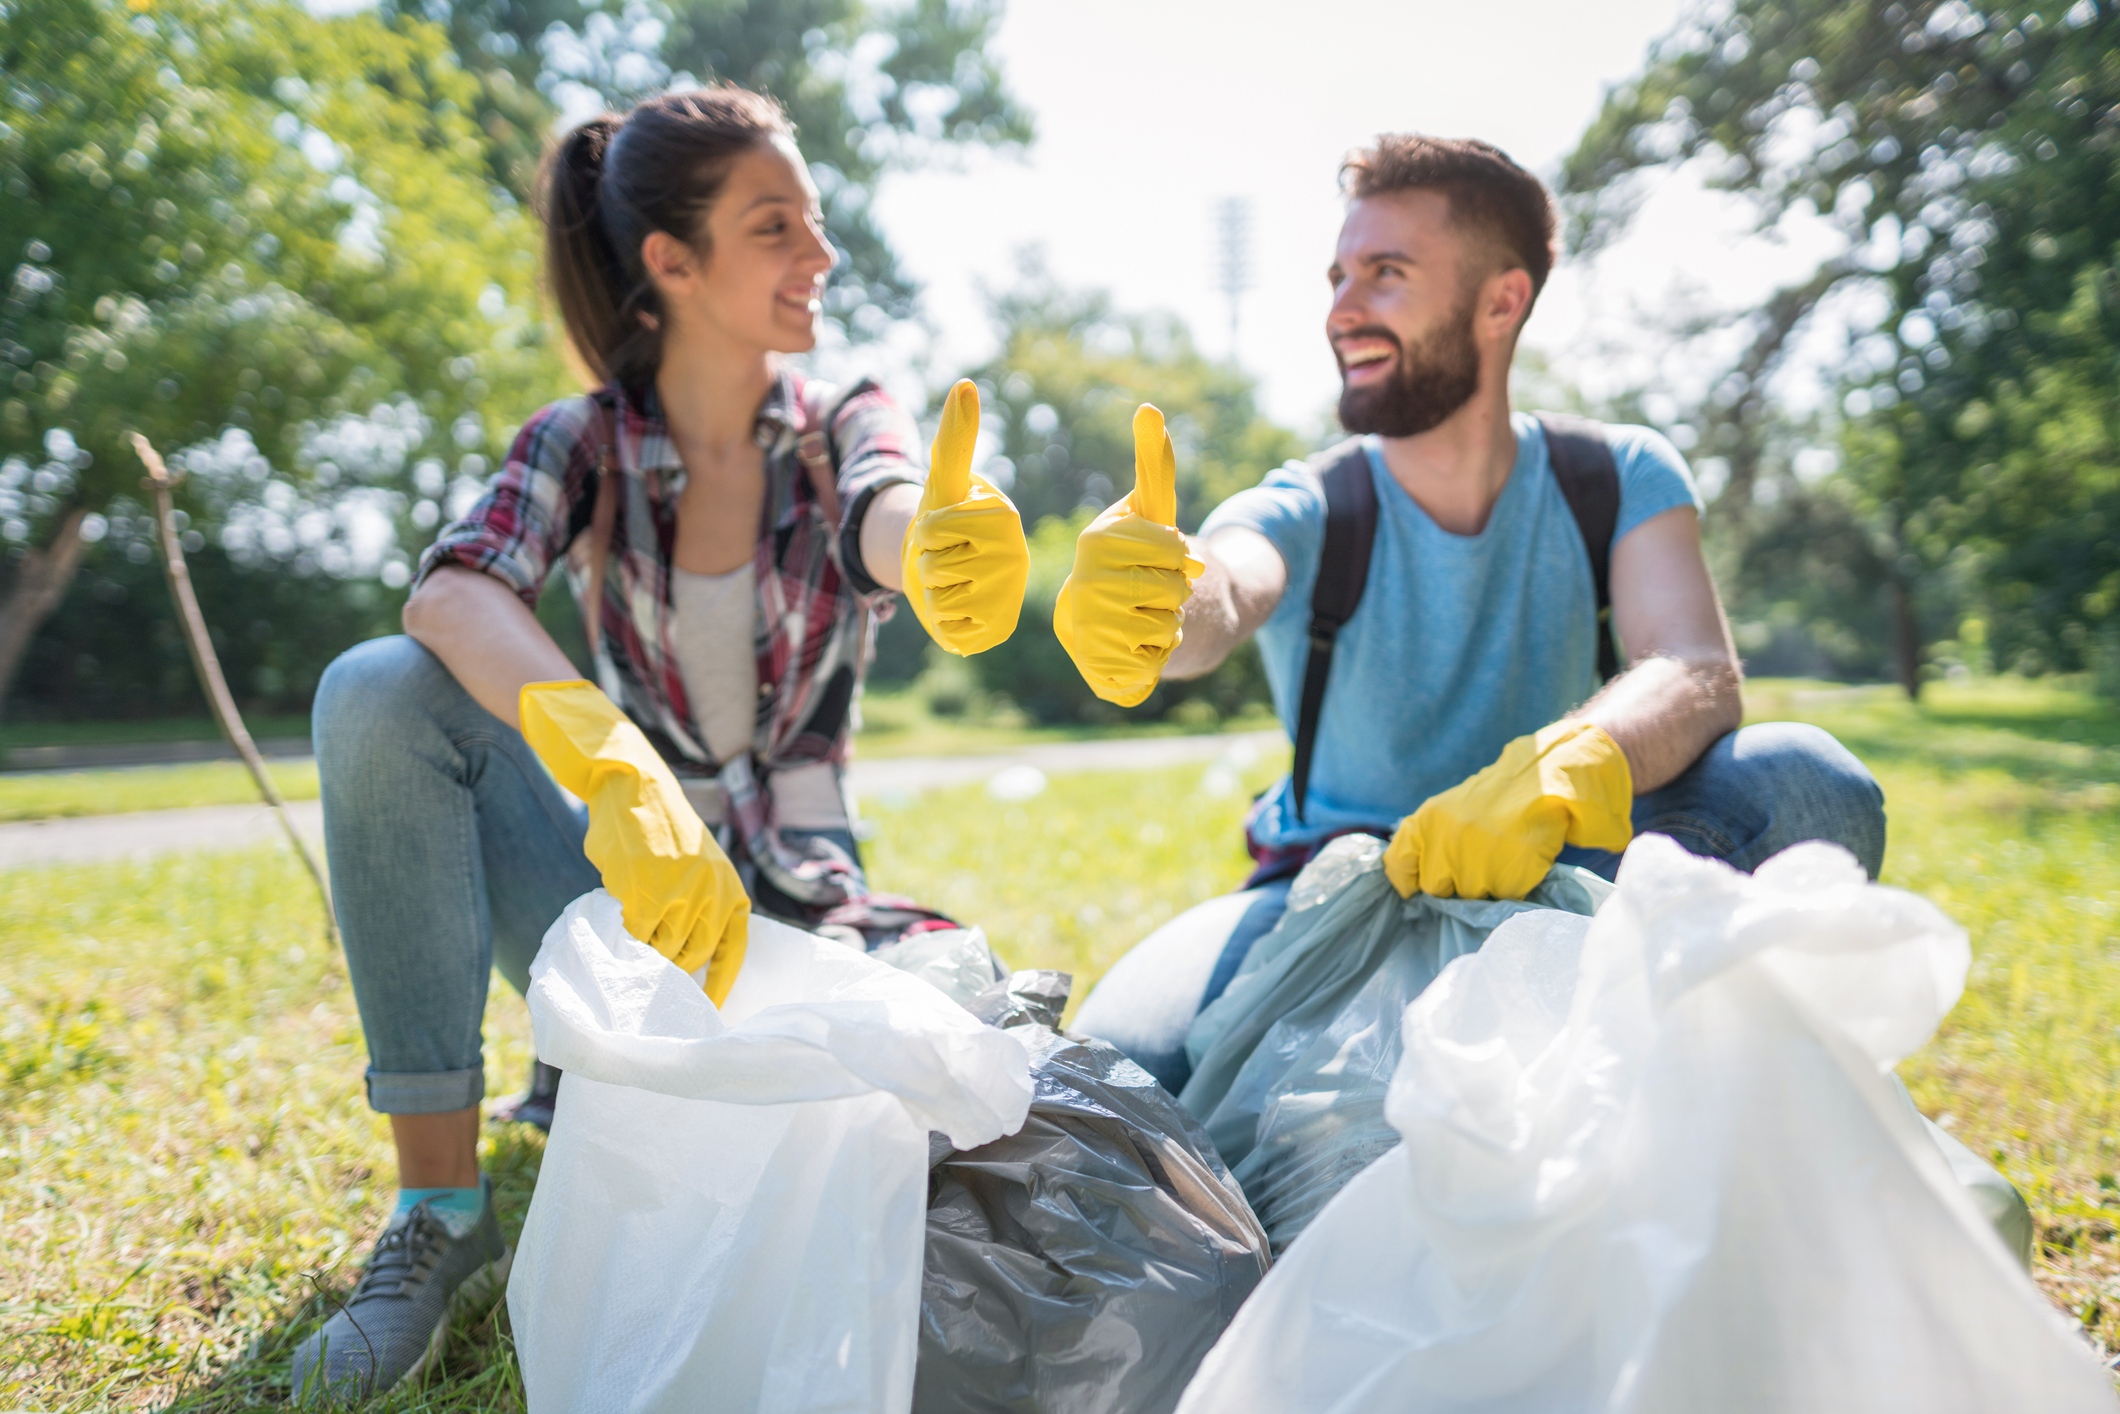 Man and woman giving thumbs-ups while sitting with trash bags, participating in a park cleanup